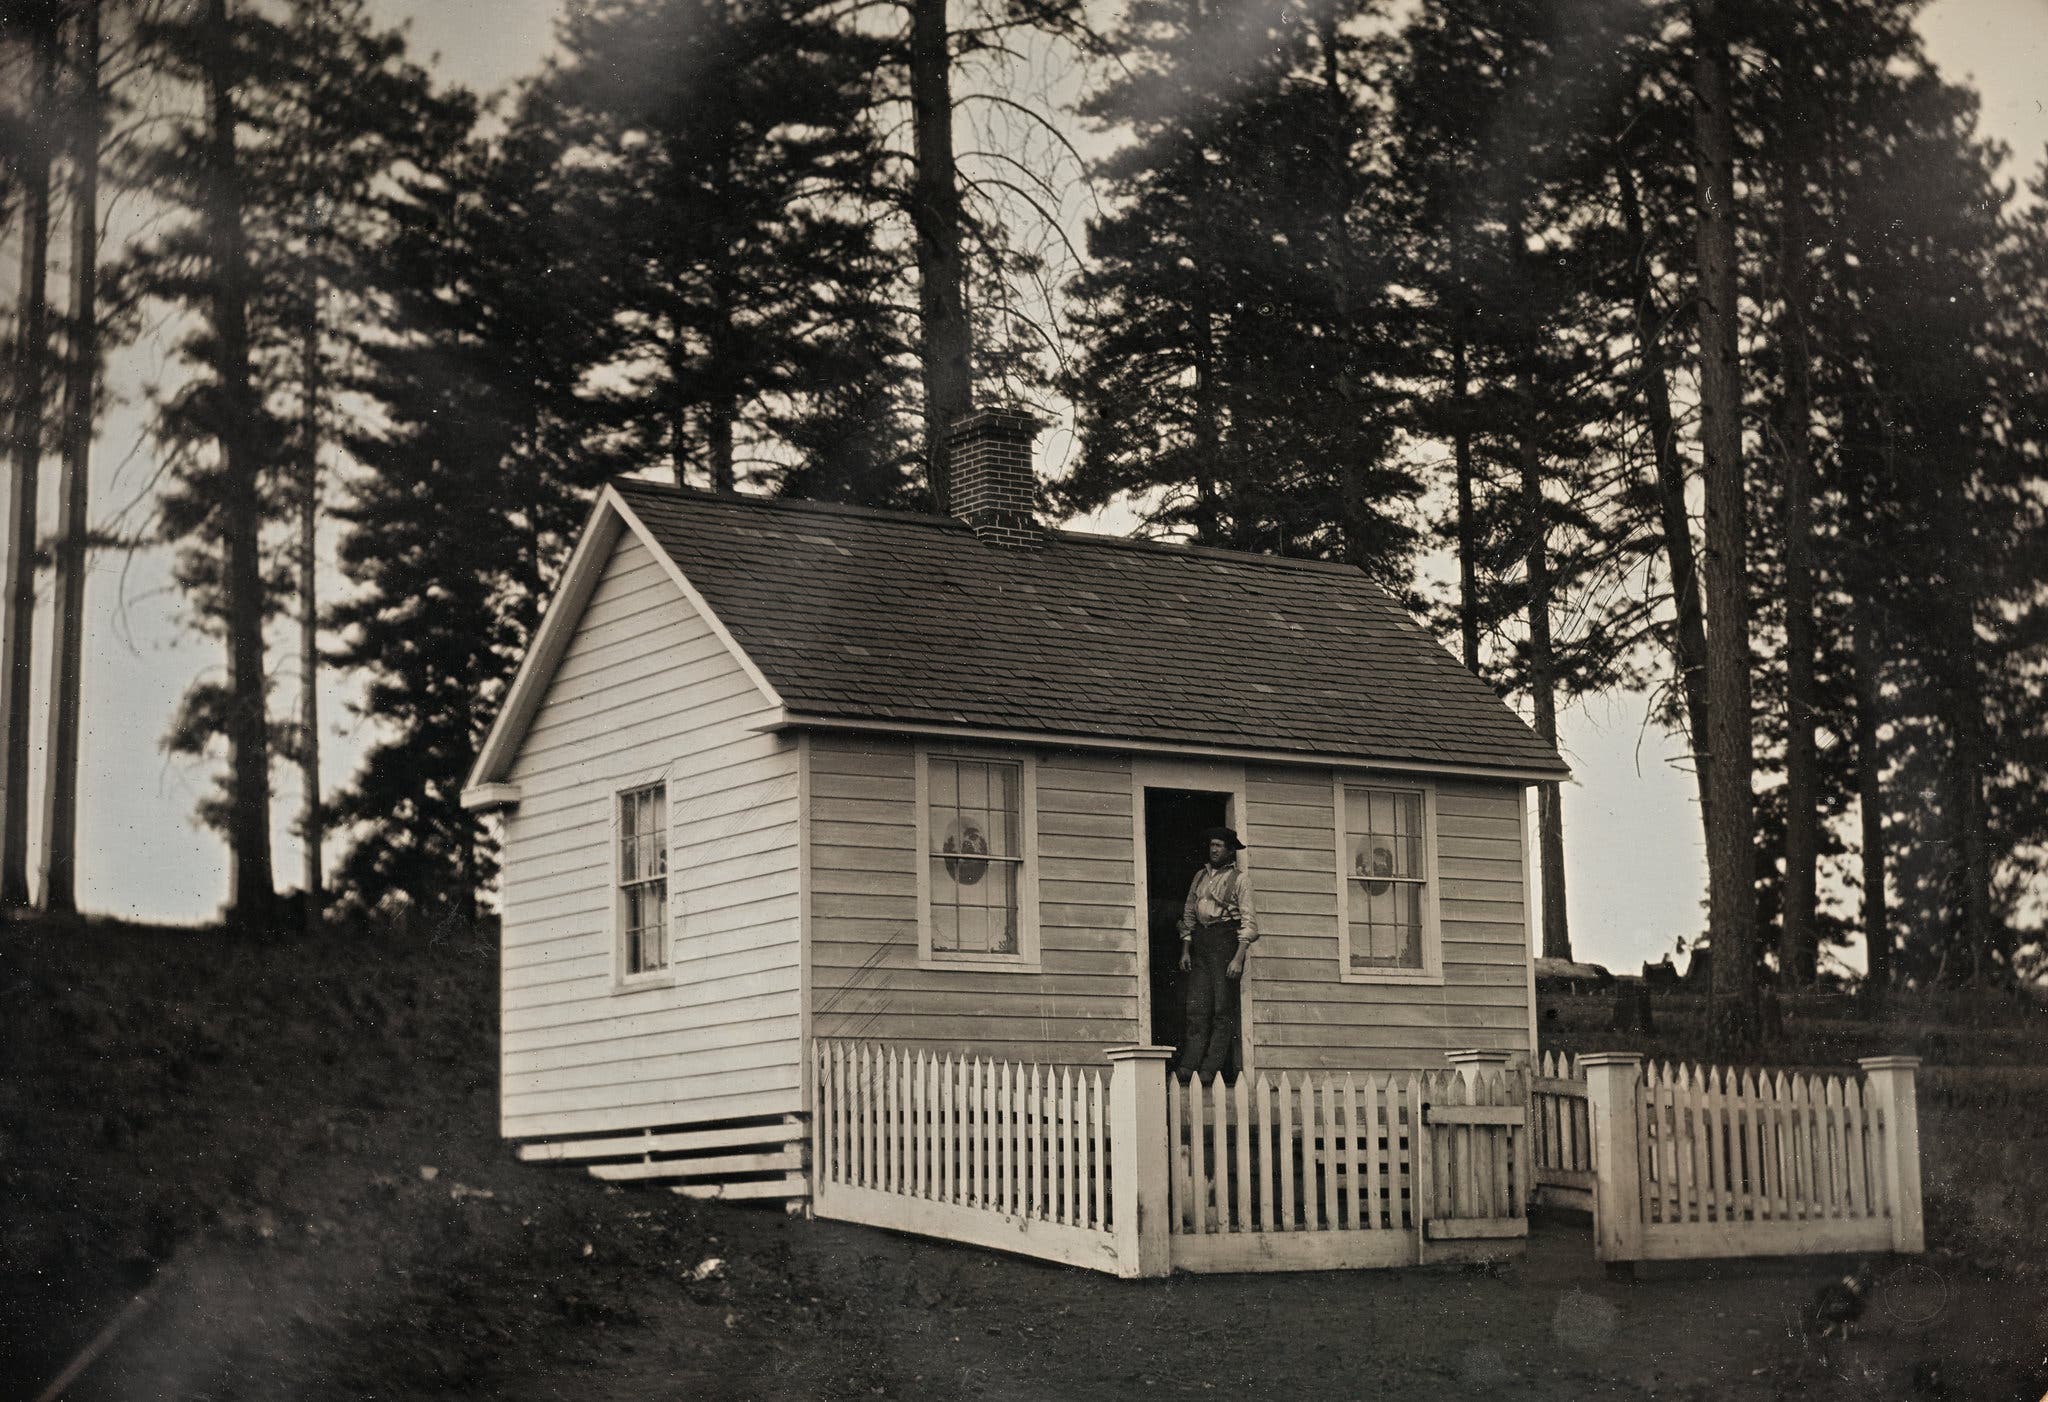 A man stands in the doorway of a prefabricated house. Circa 1855. © Canadian Photography Institute